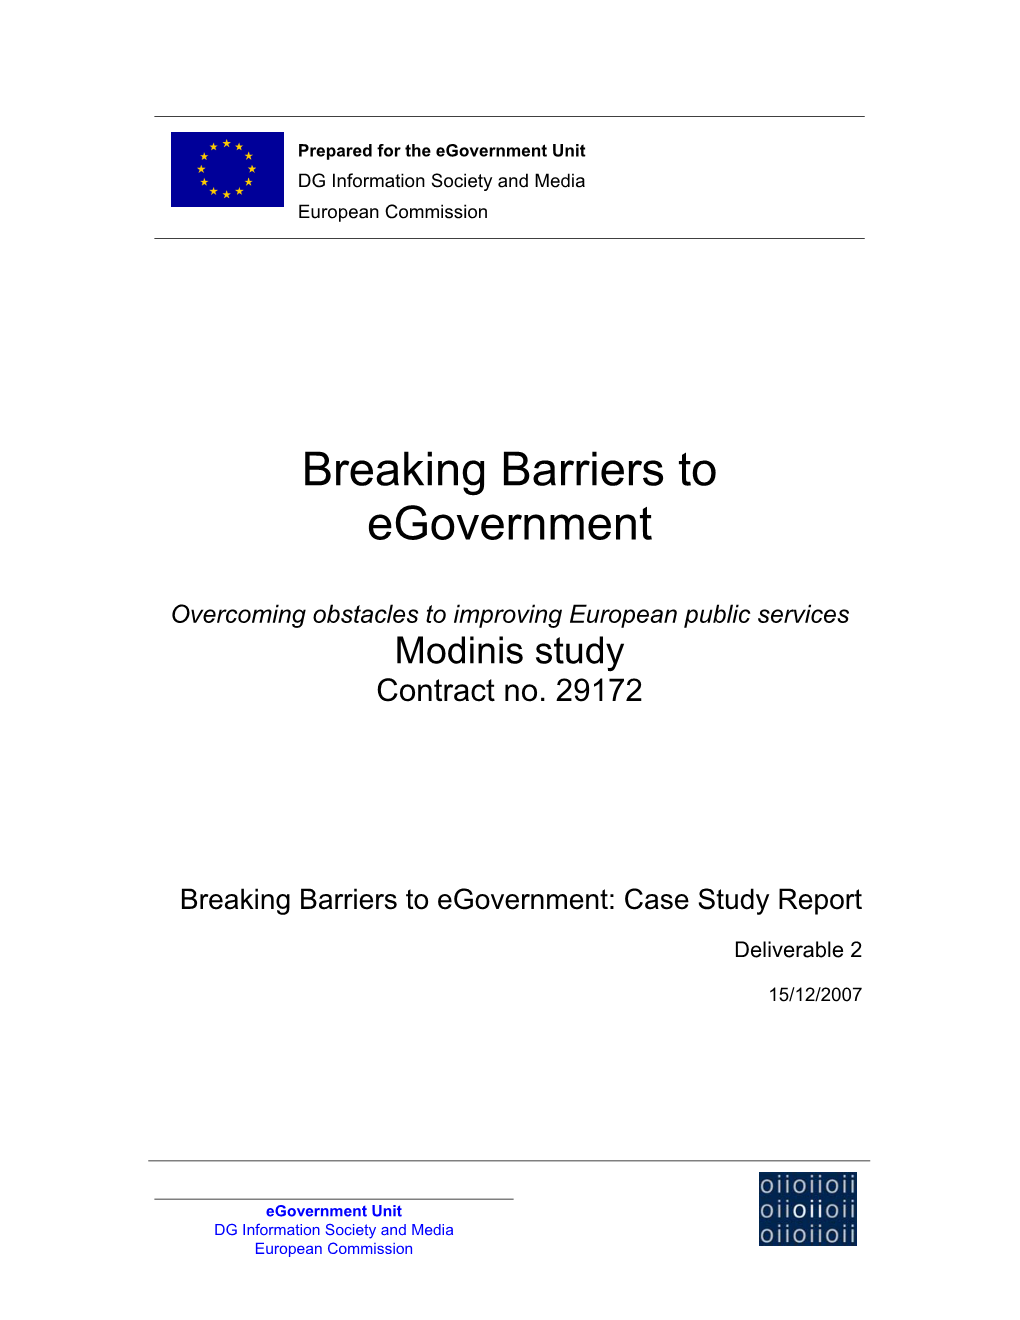 Breaking Barriers to Egovernment: Case Study Report